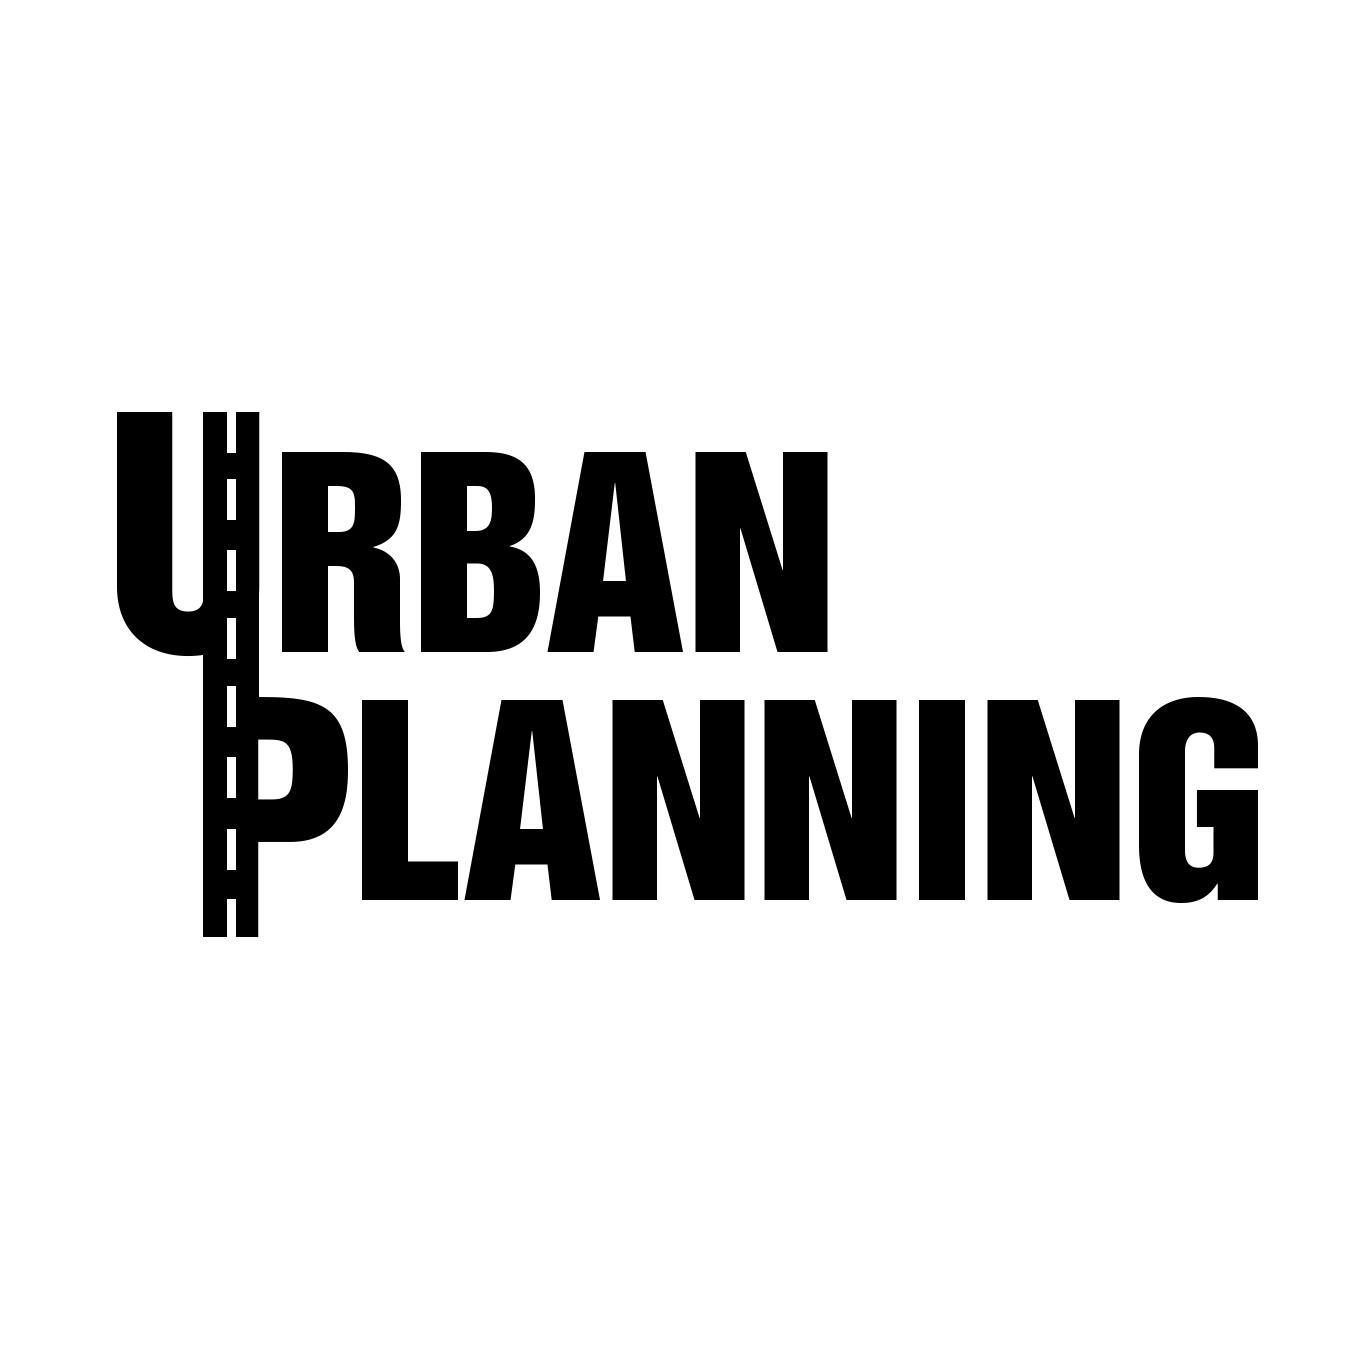 Urban Planning is the creative outlet of a city planning, science, and graphic design nerd who loves to create unconventional perspectives of our world.